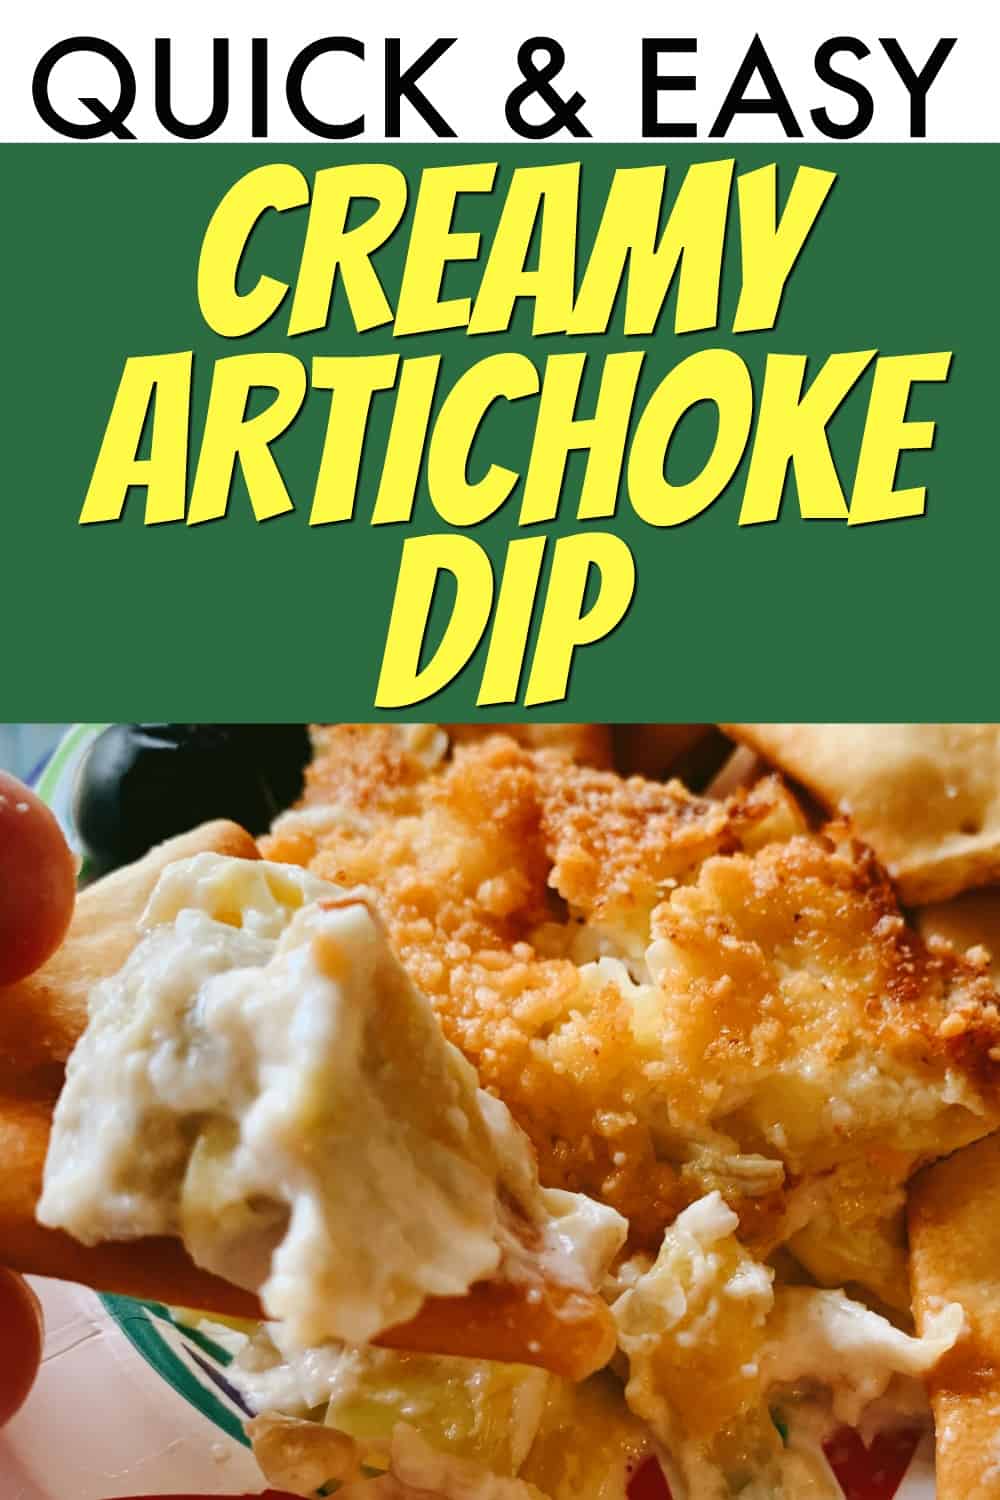 CREAMY EASY ARTICHOKE DIP RECIPE (GREAT LAST MINUTE PARTY DIP) text over image of artichoke dip with crackers on a plate